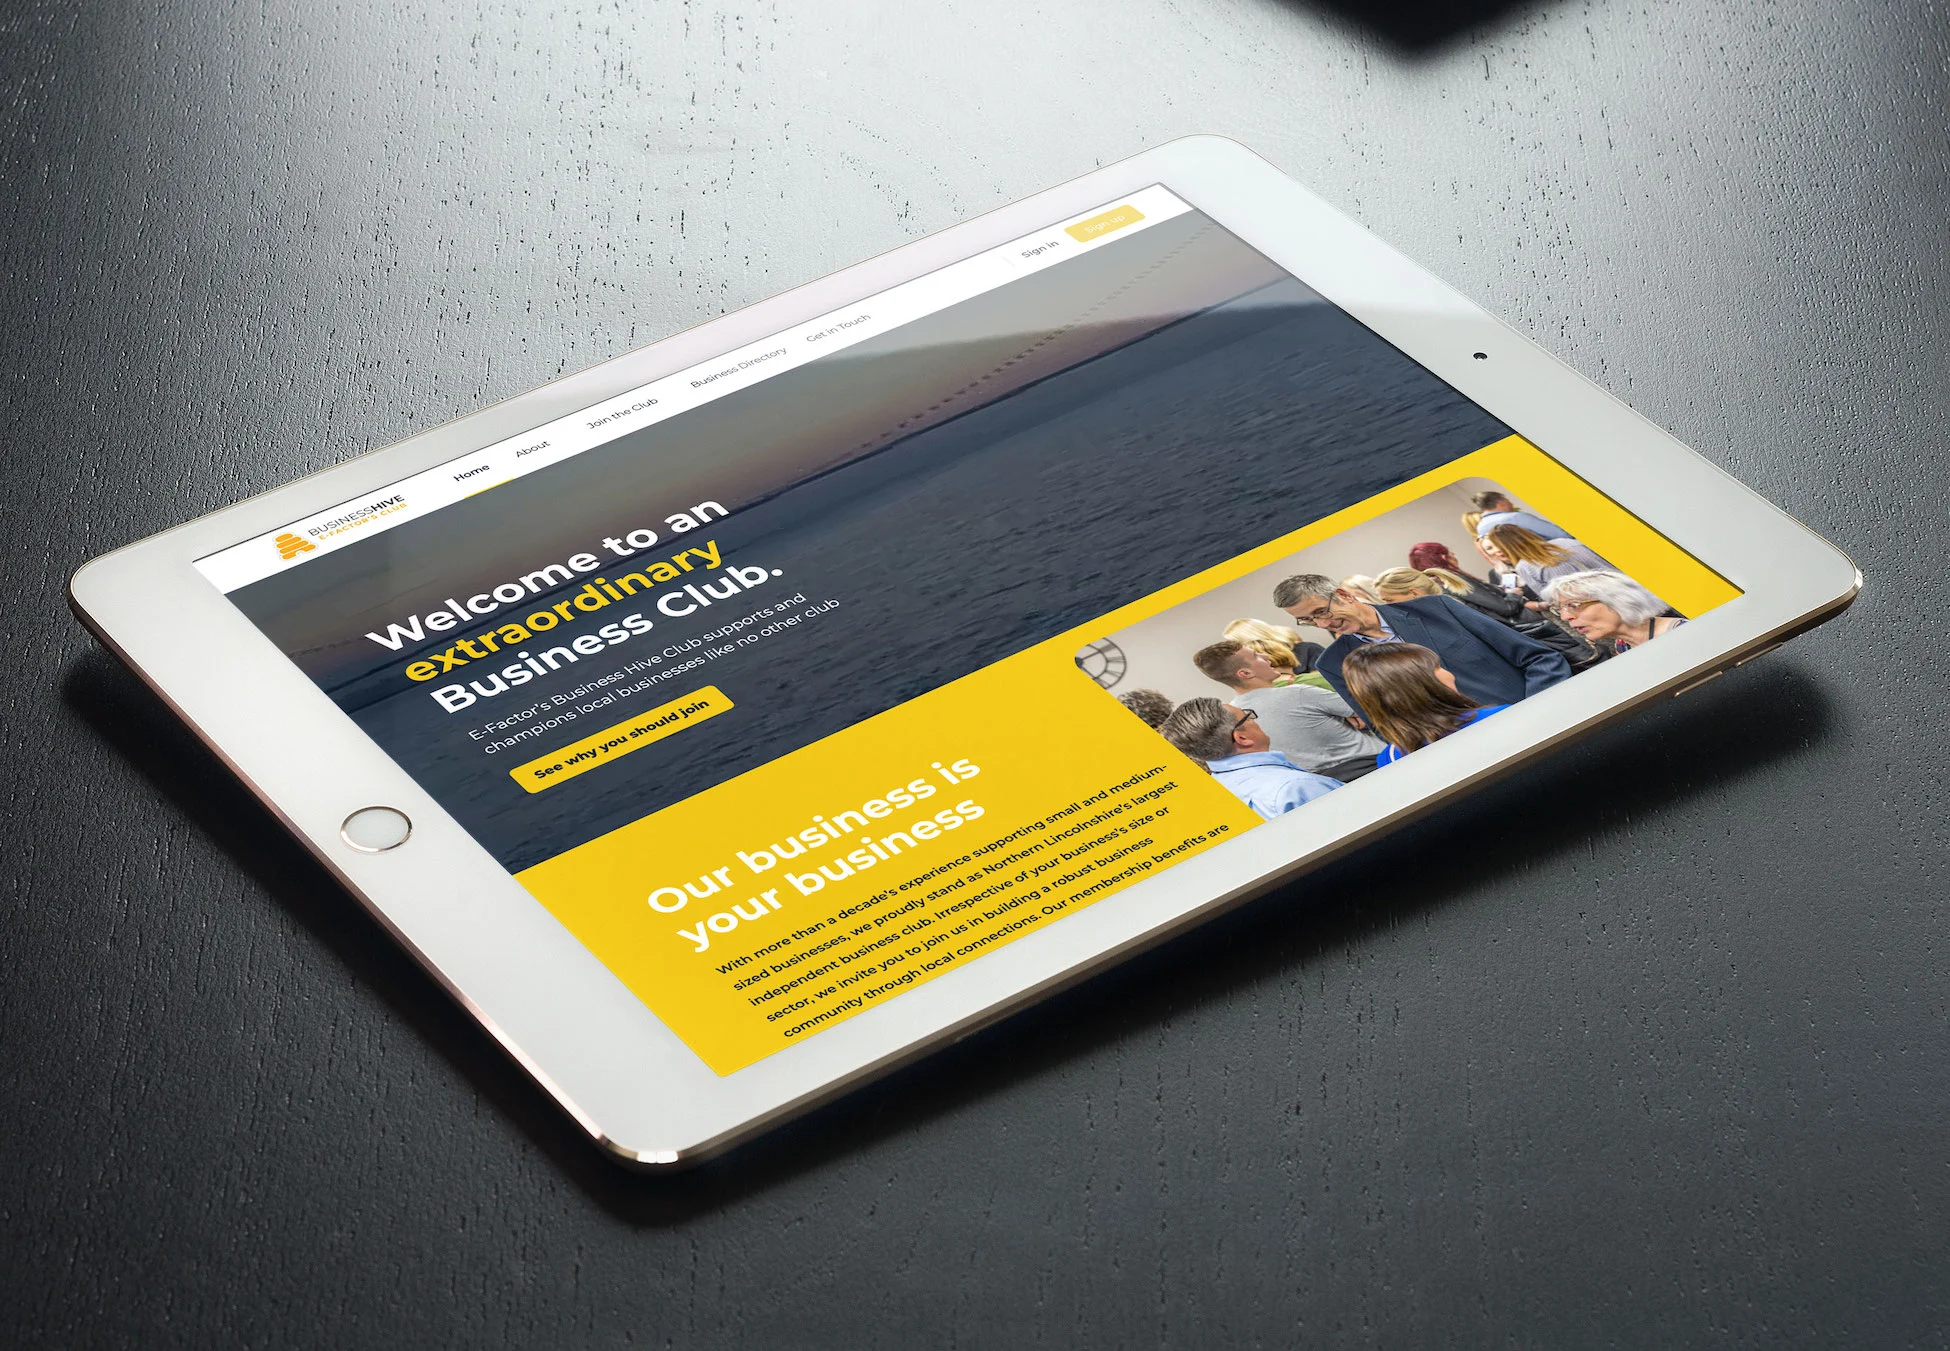 An iPad showcasing the Business Hive website.